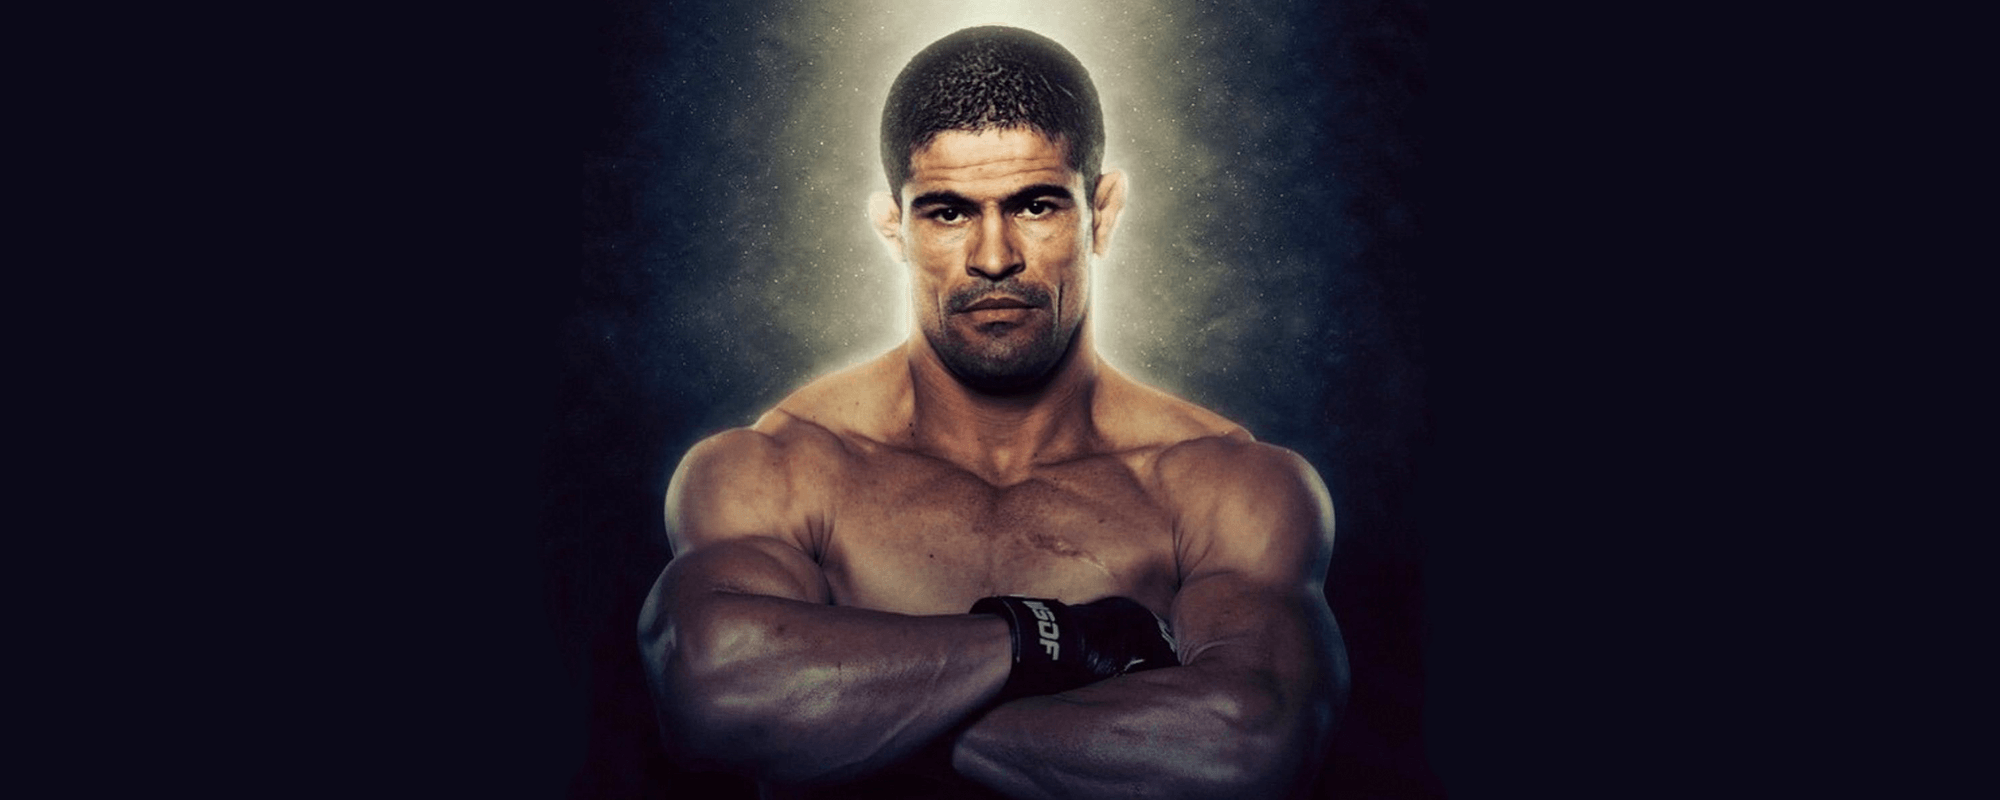 Rousimar Palhares - The MMA Monster 